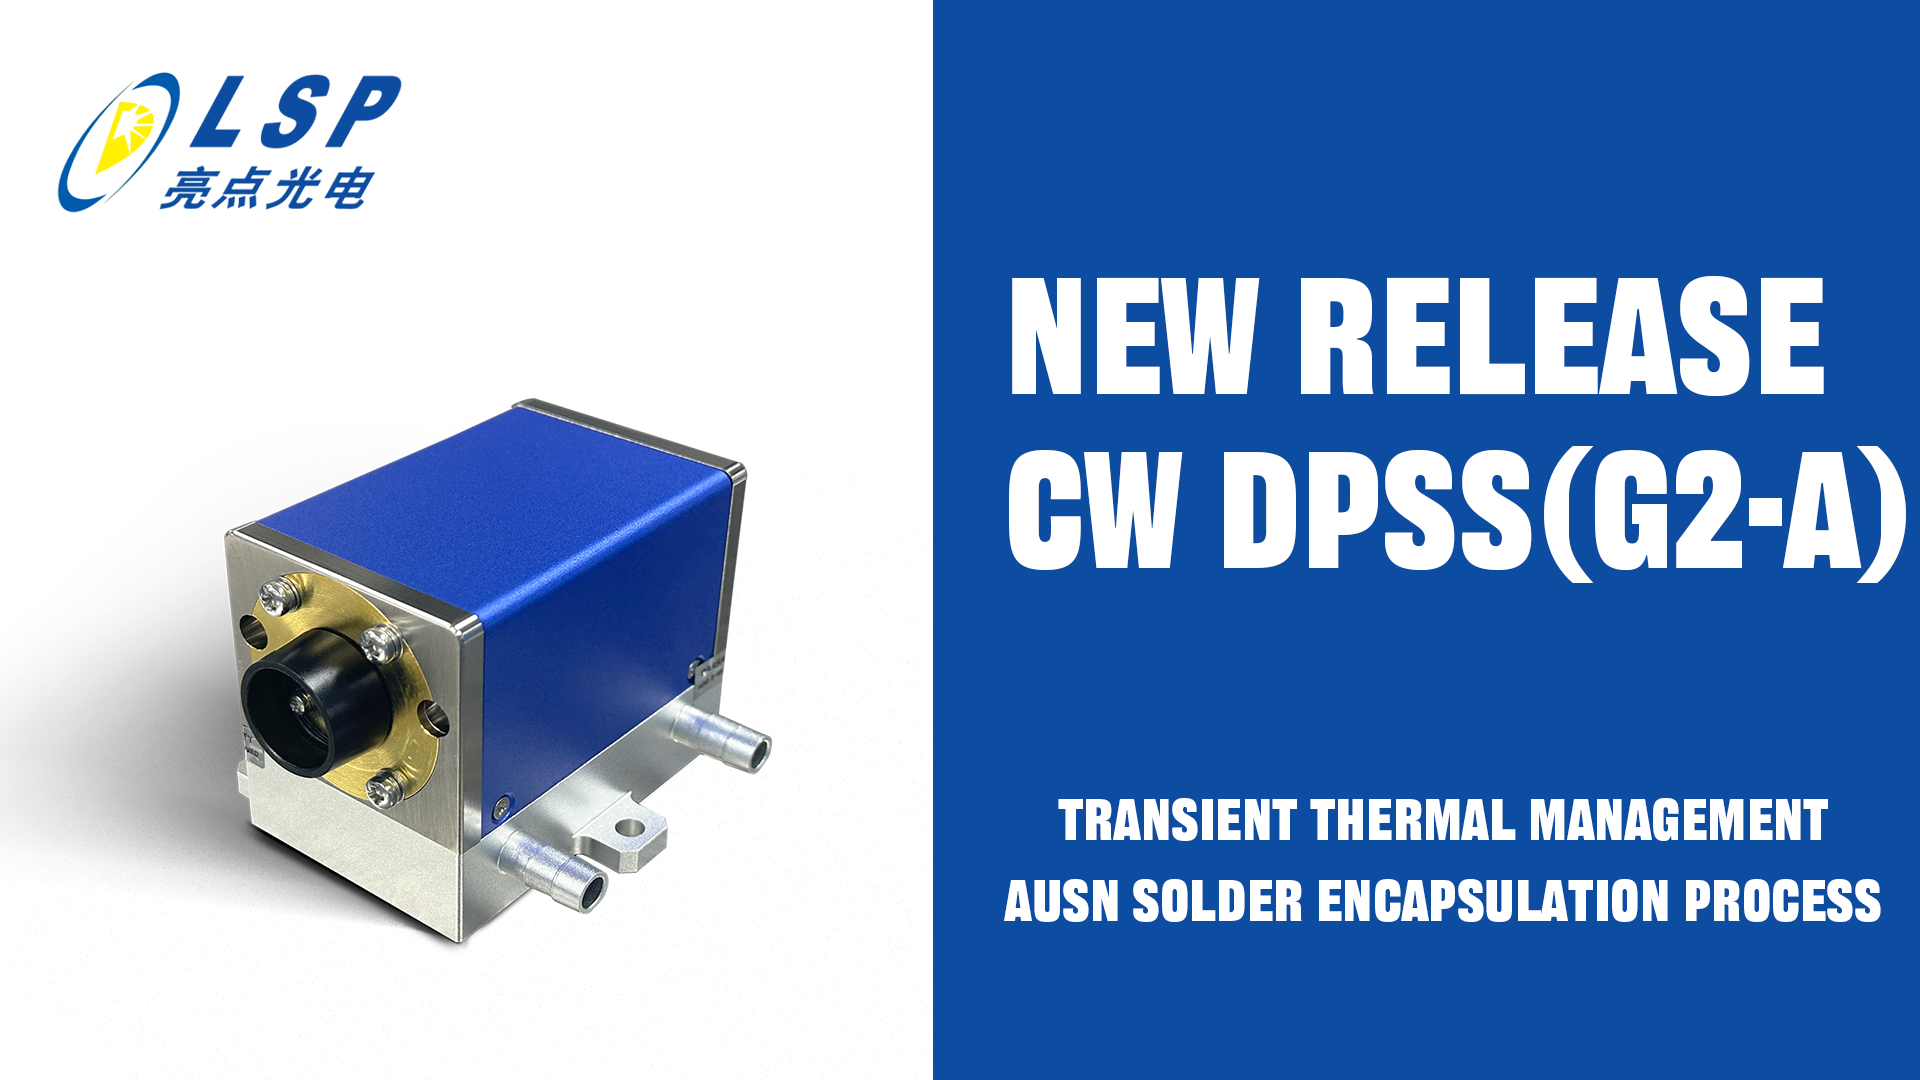 New Product Launched! Diode Laser Solid State Pump Source Latest Technology Unveiled.